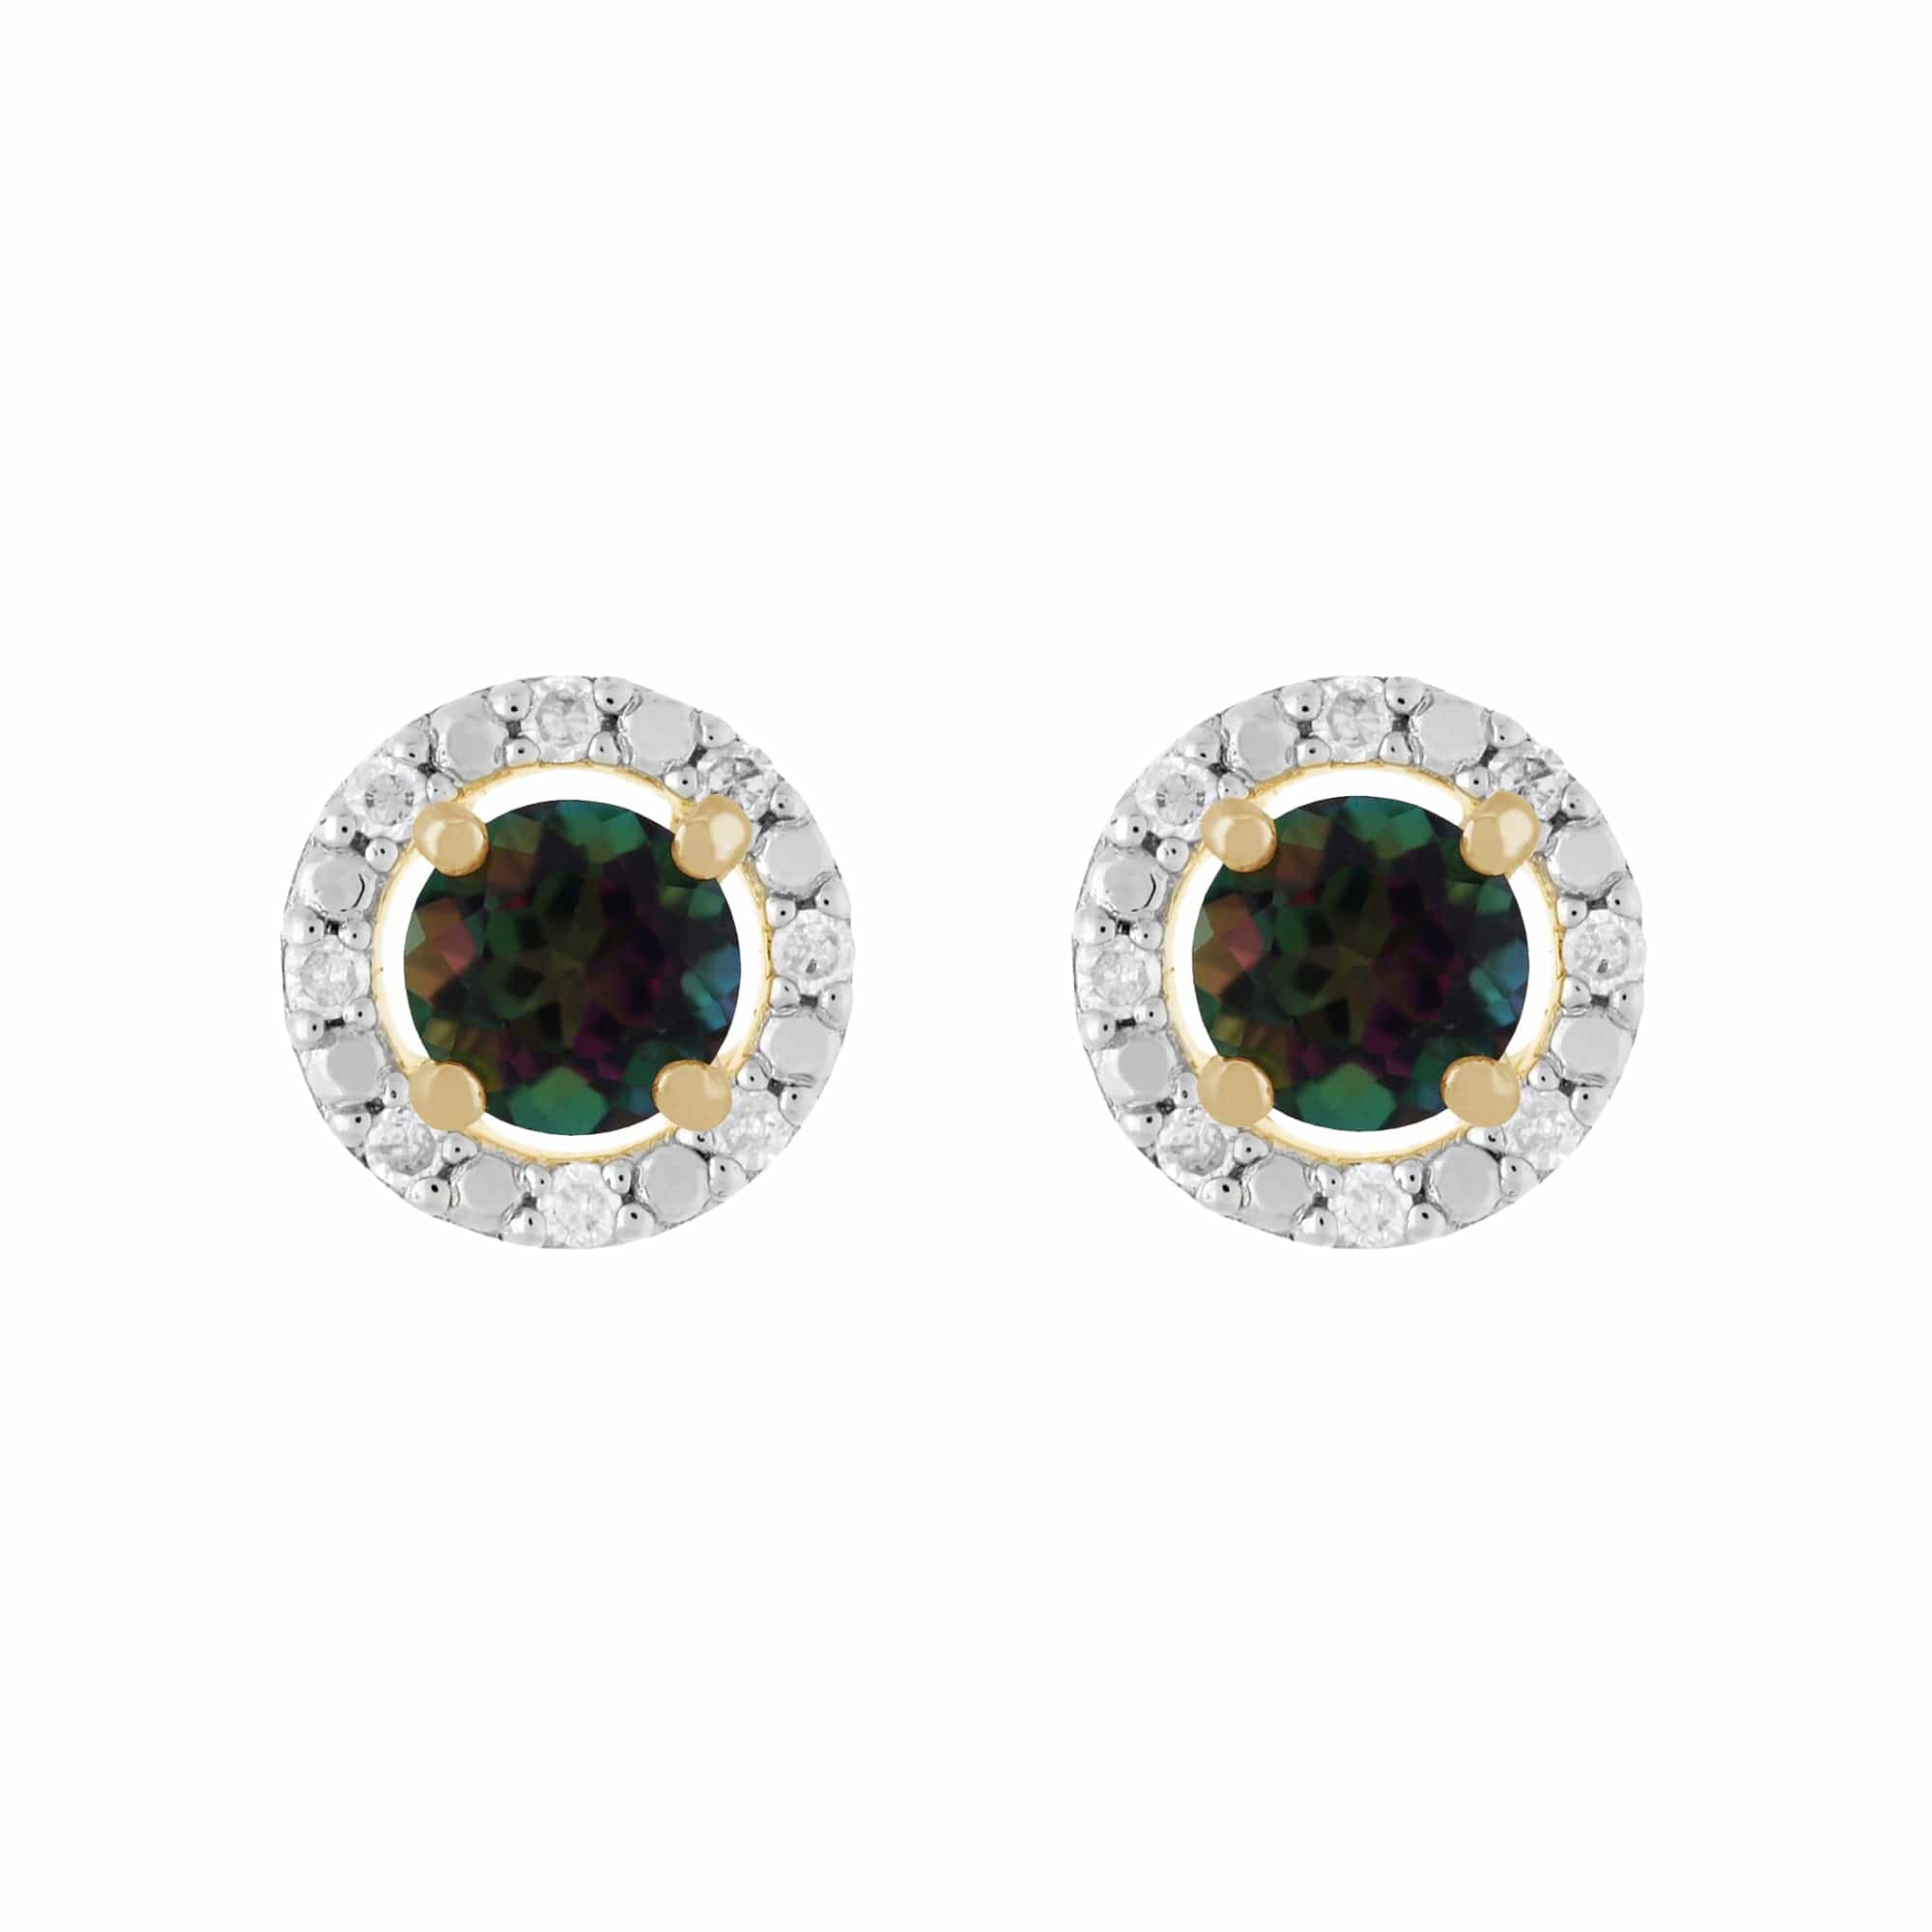 22523-191E0376019 Classic Round Mystic Topaz Stud Earrings with Detachable Diamond Round Earrings Jacket Set in 9ct Yellow Gold 1